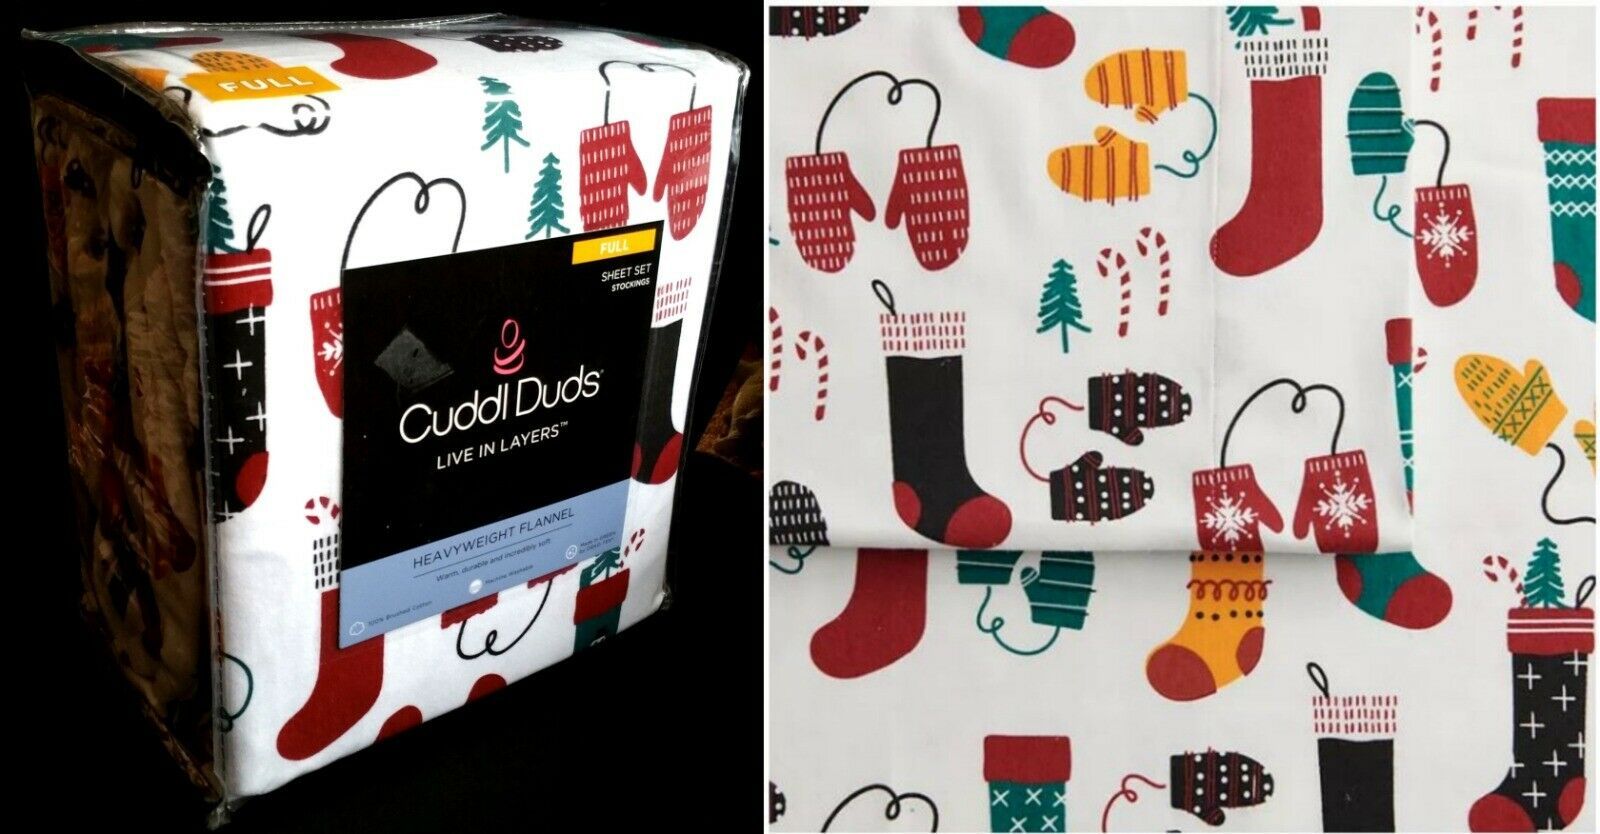 $70 Cuddl Duds Sheet Set Flannel Cotton Stocking Glove Tree Winter Holiday Full - $45.51